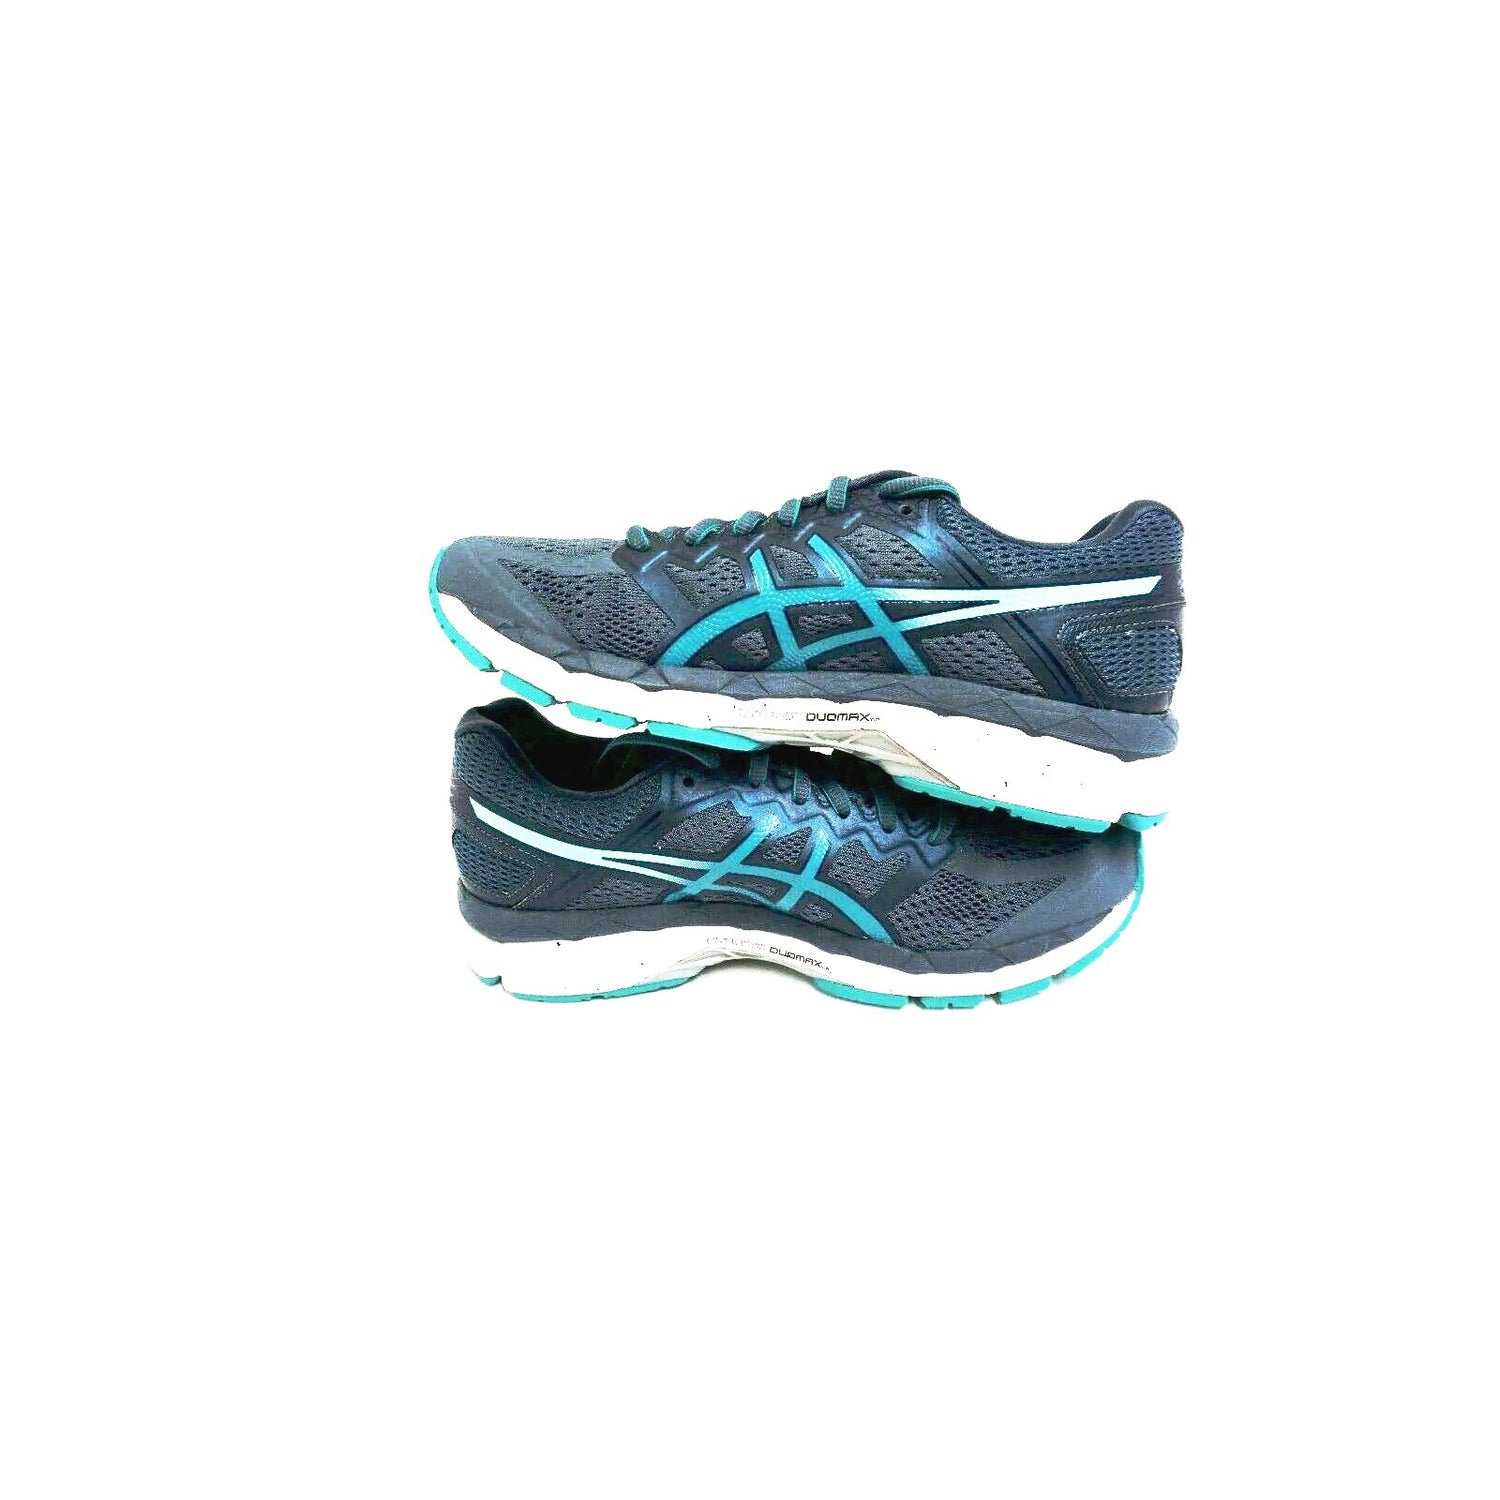 Asics women's gel-superion smoke blue running shoes size 8.5 us new